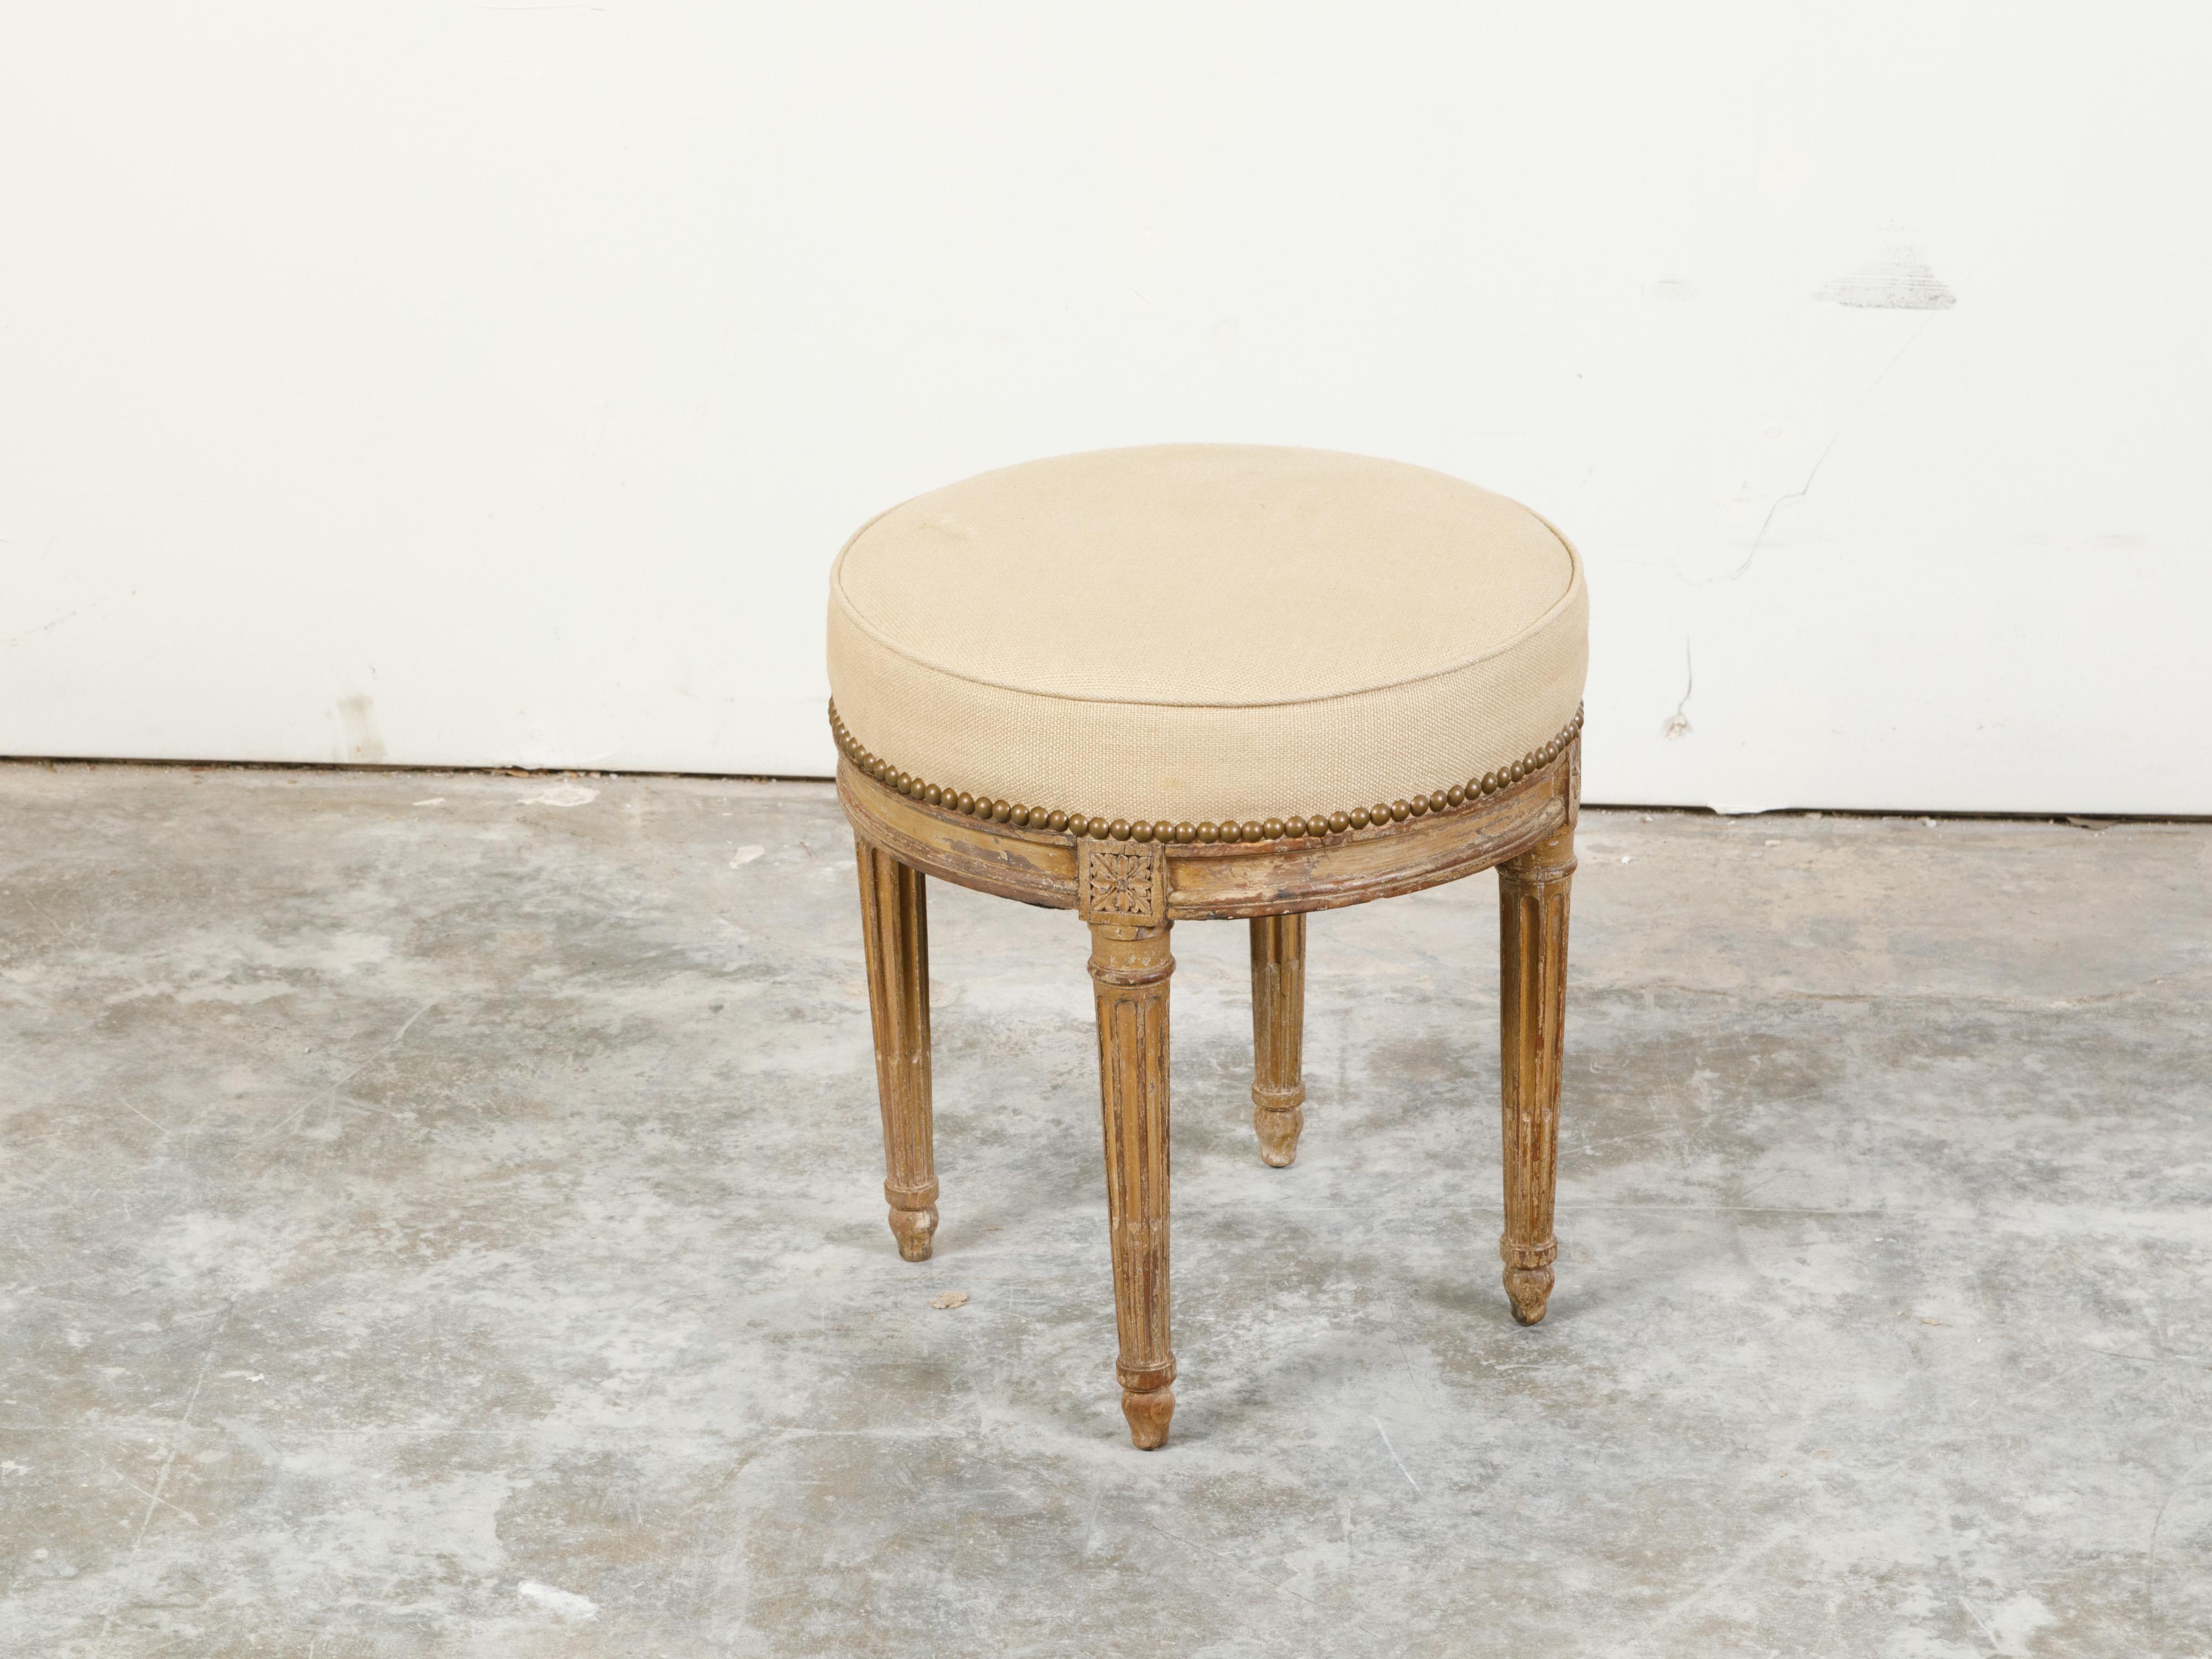 A French Neoclassical style painted wood stool from the 19th century, with fluted legs and new upholstery. Created in France during the 19th century, this Neoclassical style stool features a circular top newly recovered with a neutral toned fabric